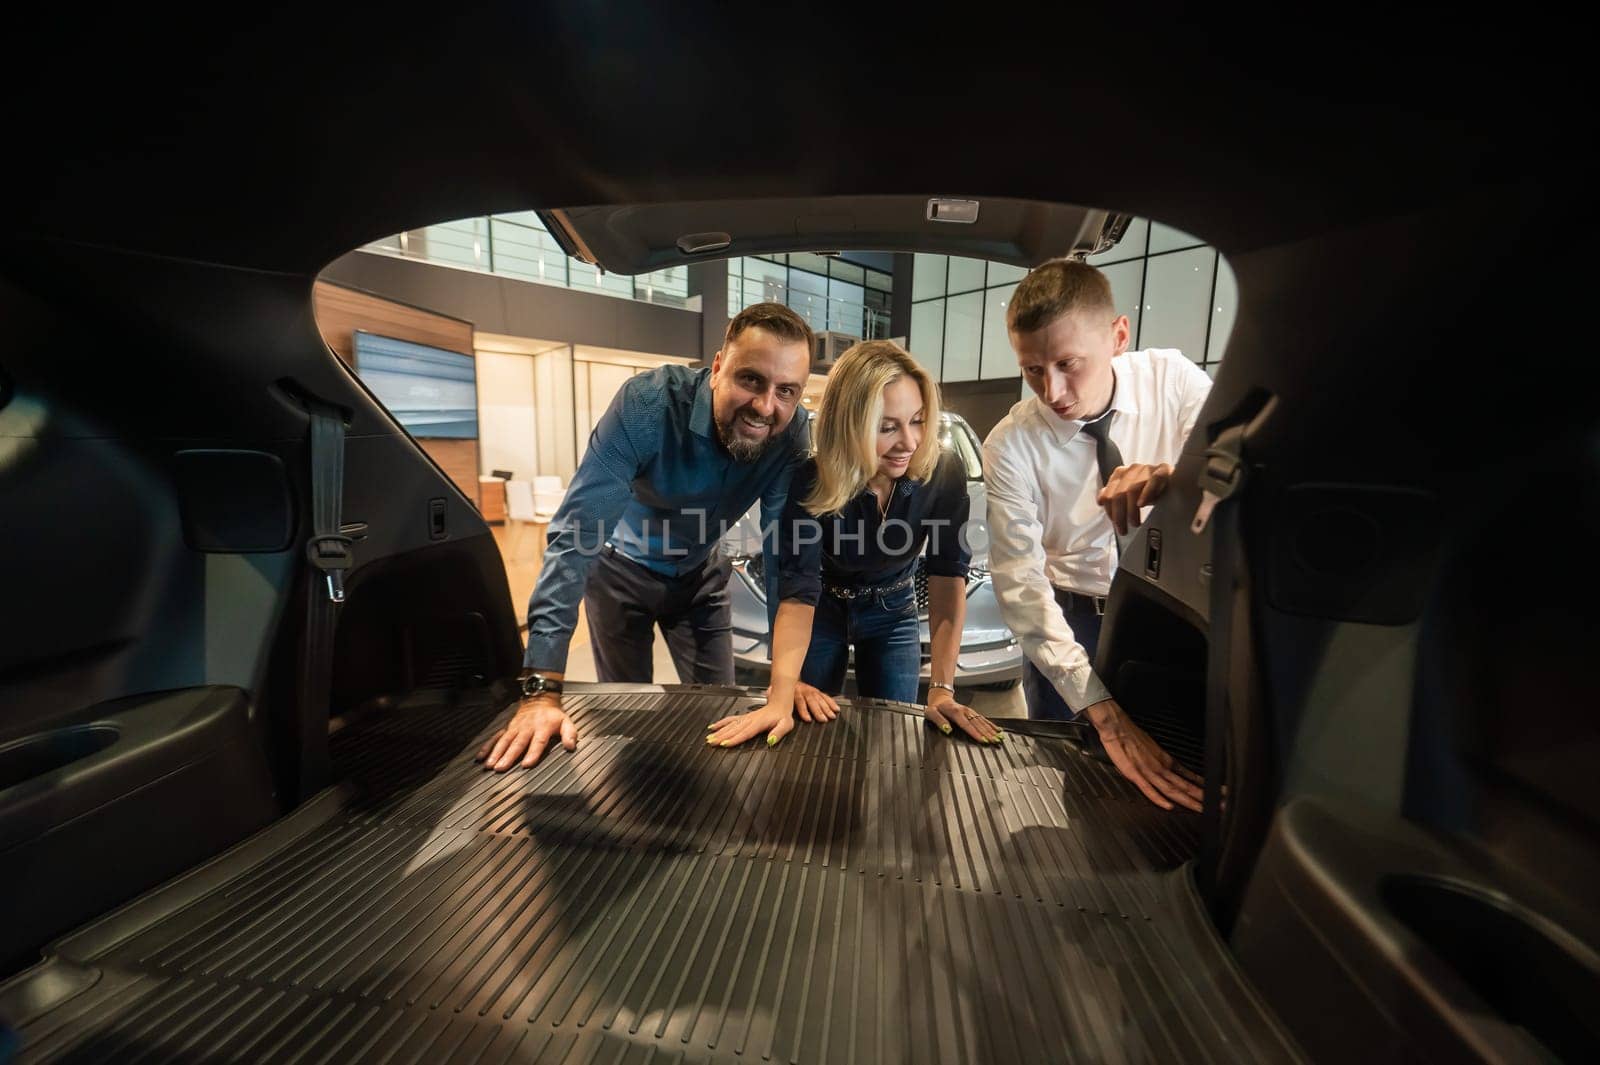 The seller demonstrates the interior of the car to buyers. Caucasian couple chooses a car